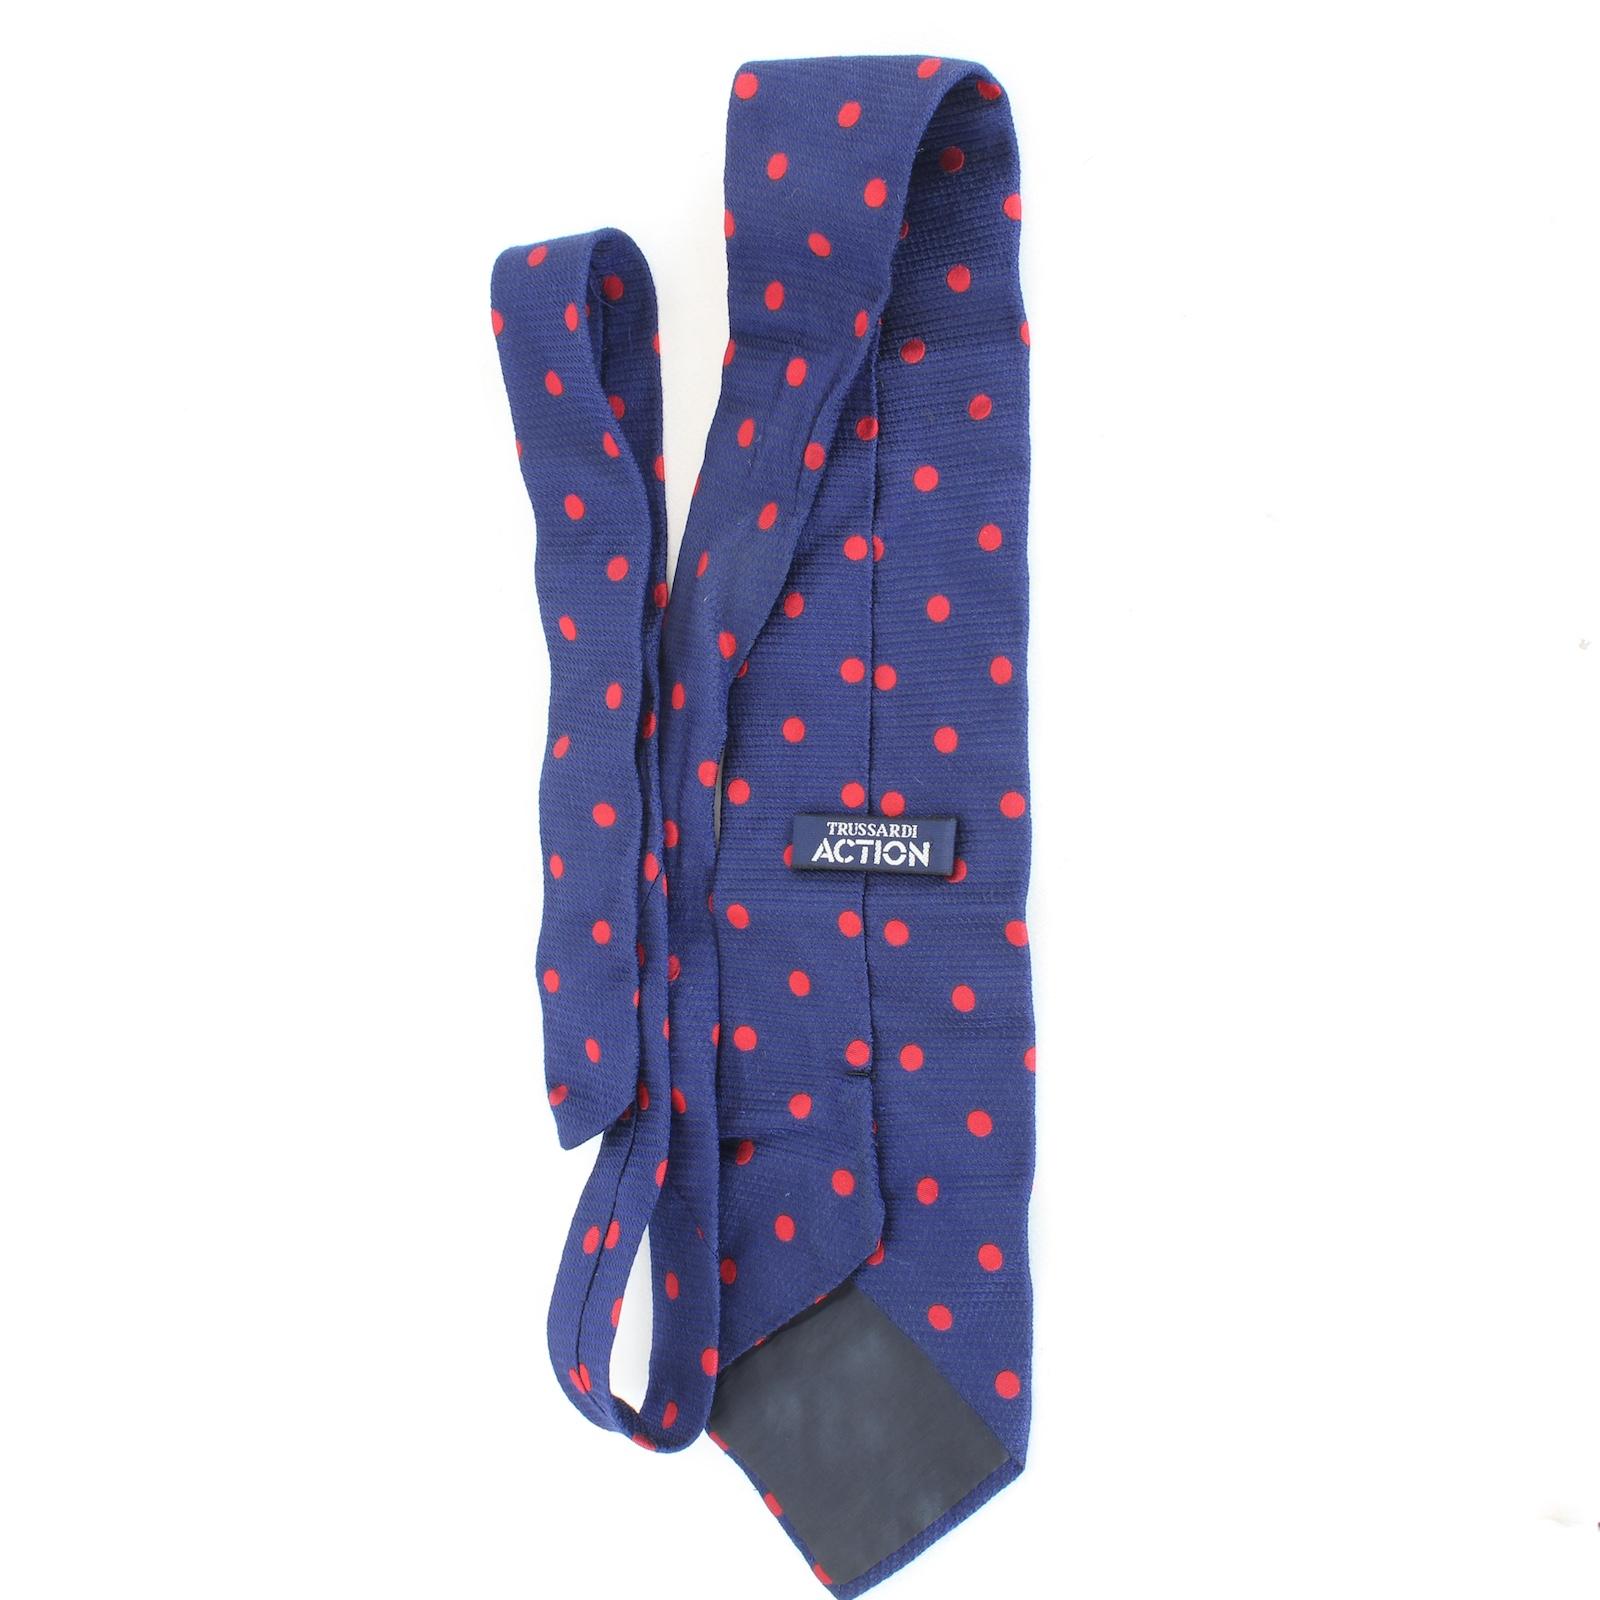 Pierre Cardin vintage 80s tie. Blue and red color with paisley pattern, 100% silk. Made in italy.

Length: 138 cm
Width: 11 cm